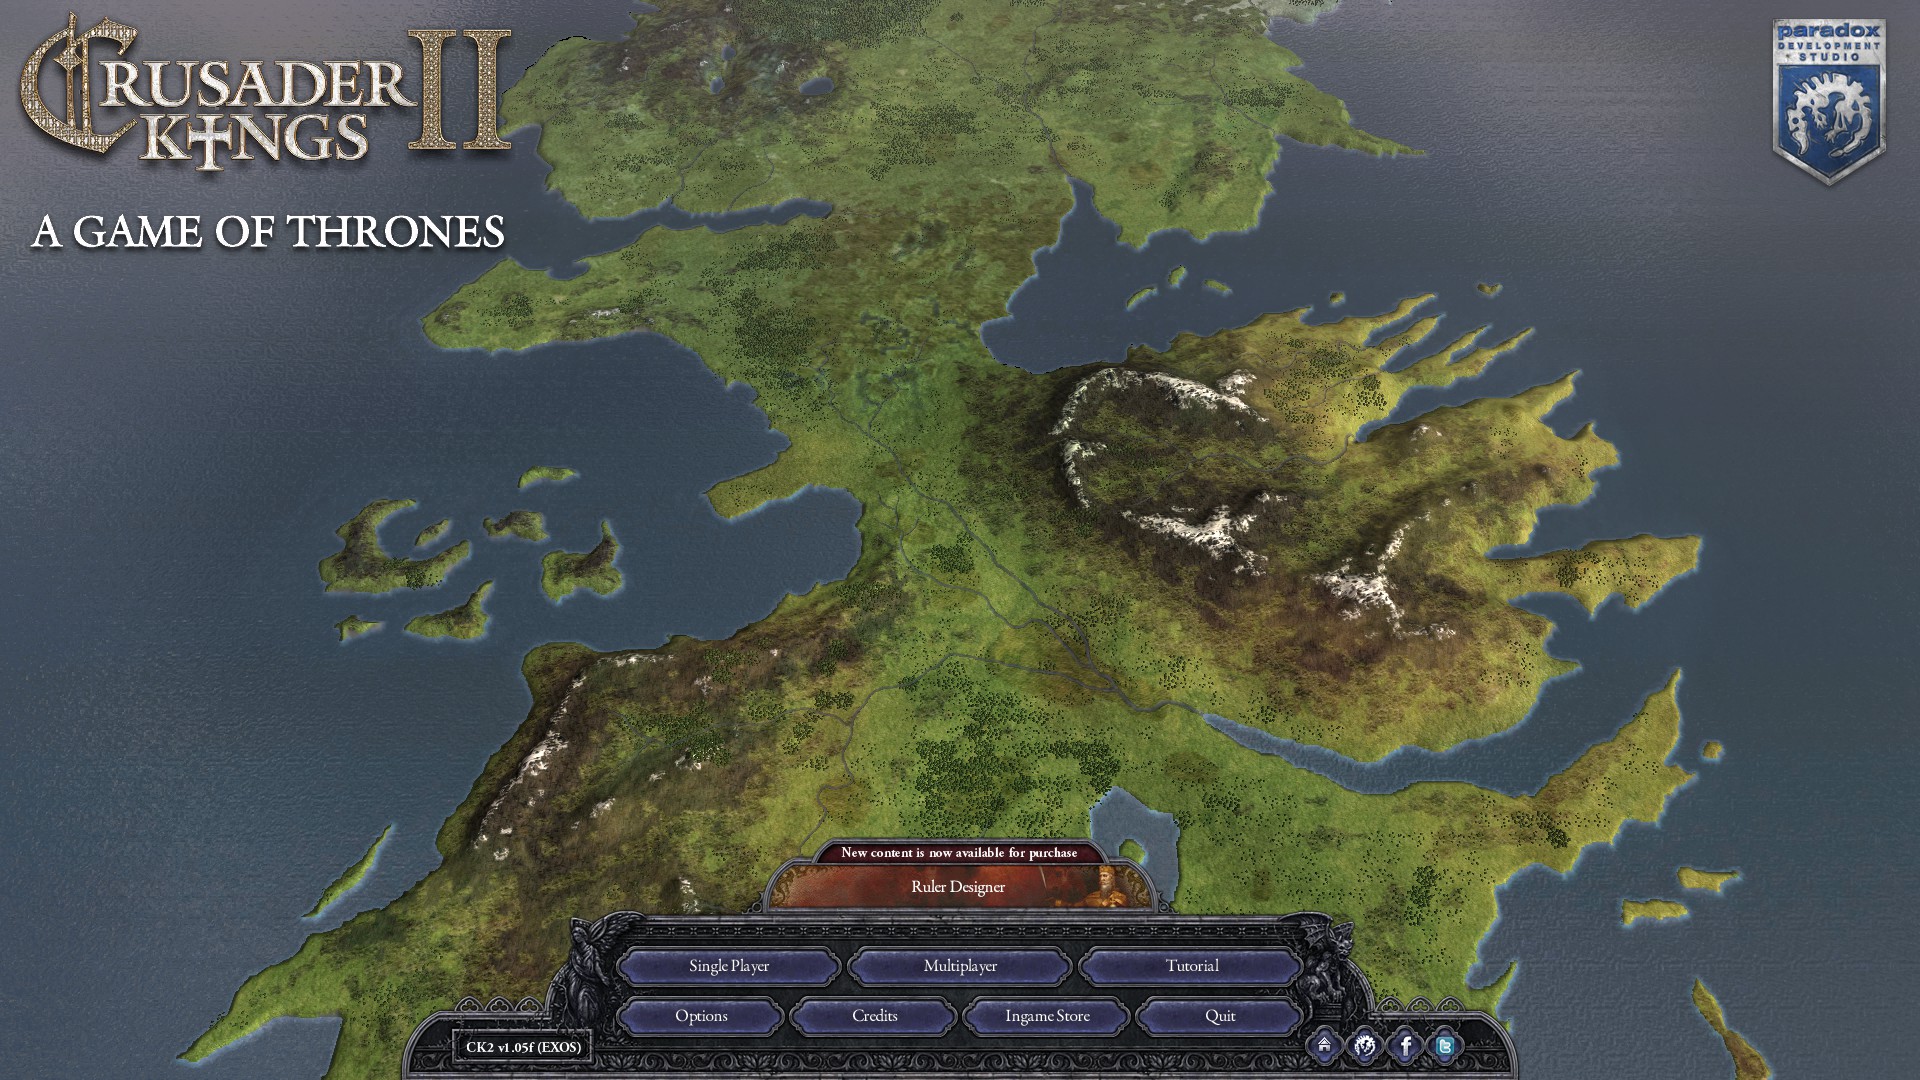 The Perfect Game Of Thrones Video Game Already Exists